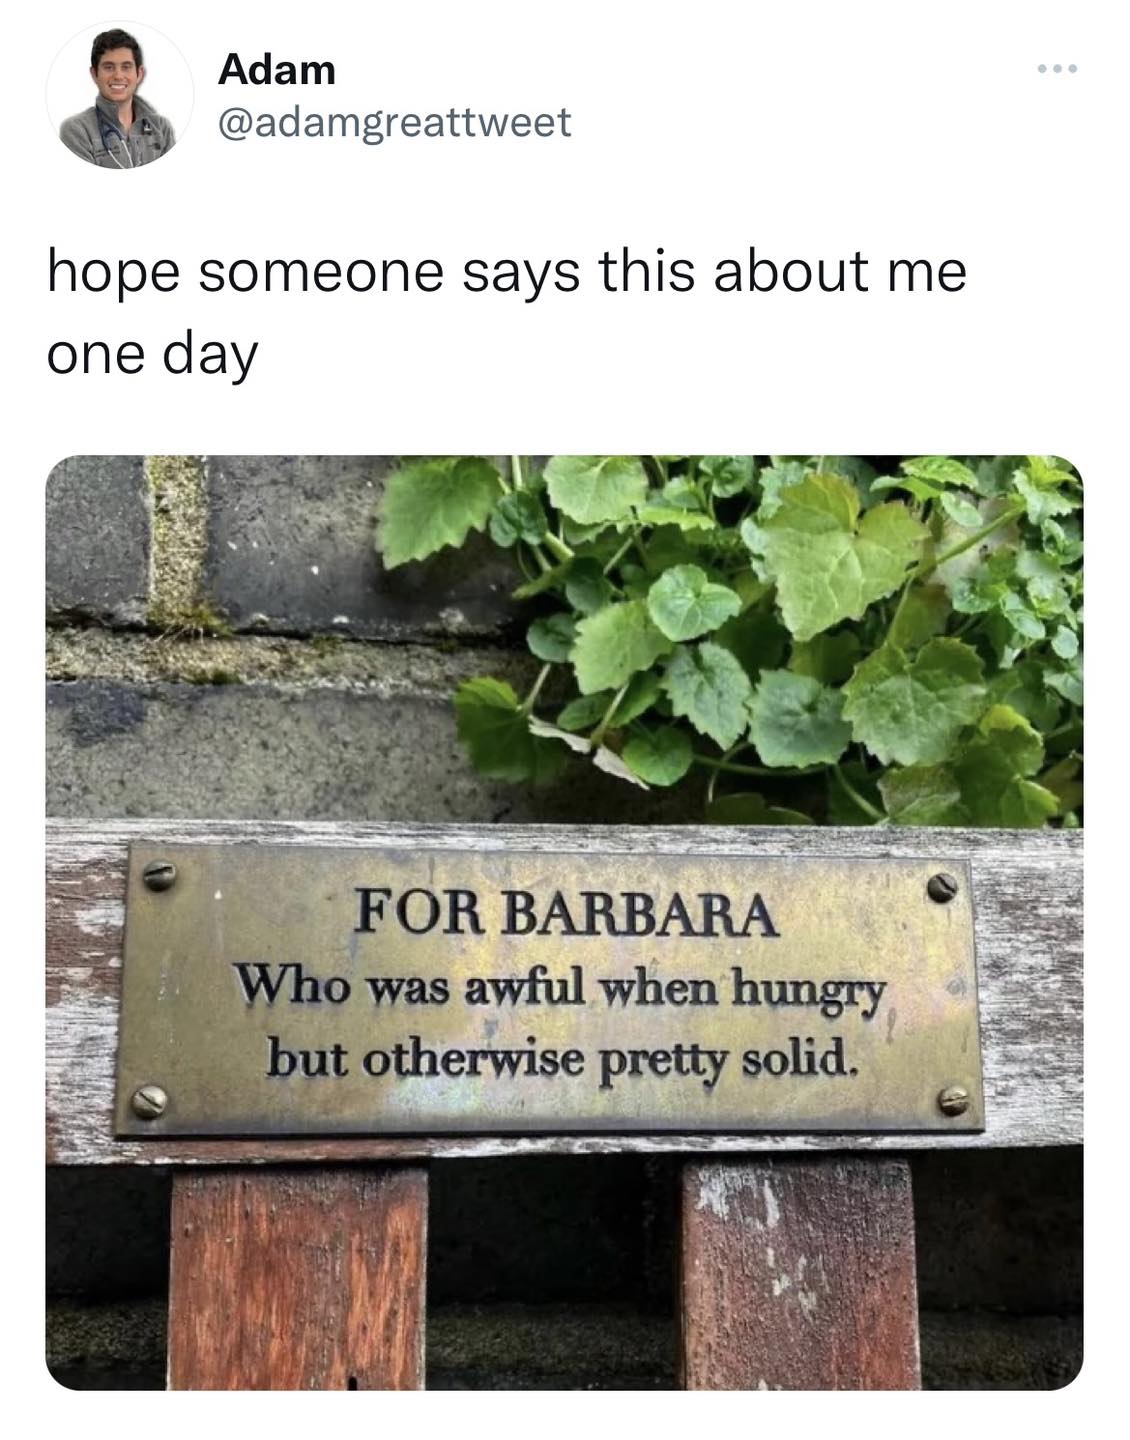 for barbara, who was awful when hungry but otherwise pretty solid, hope someone says this about me one day